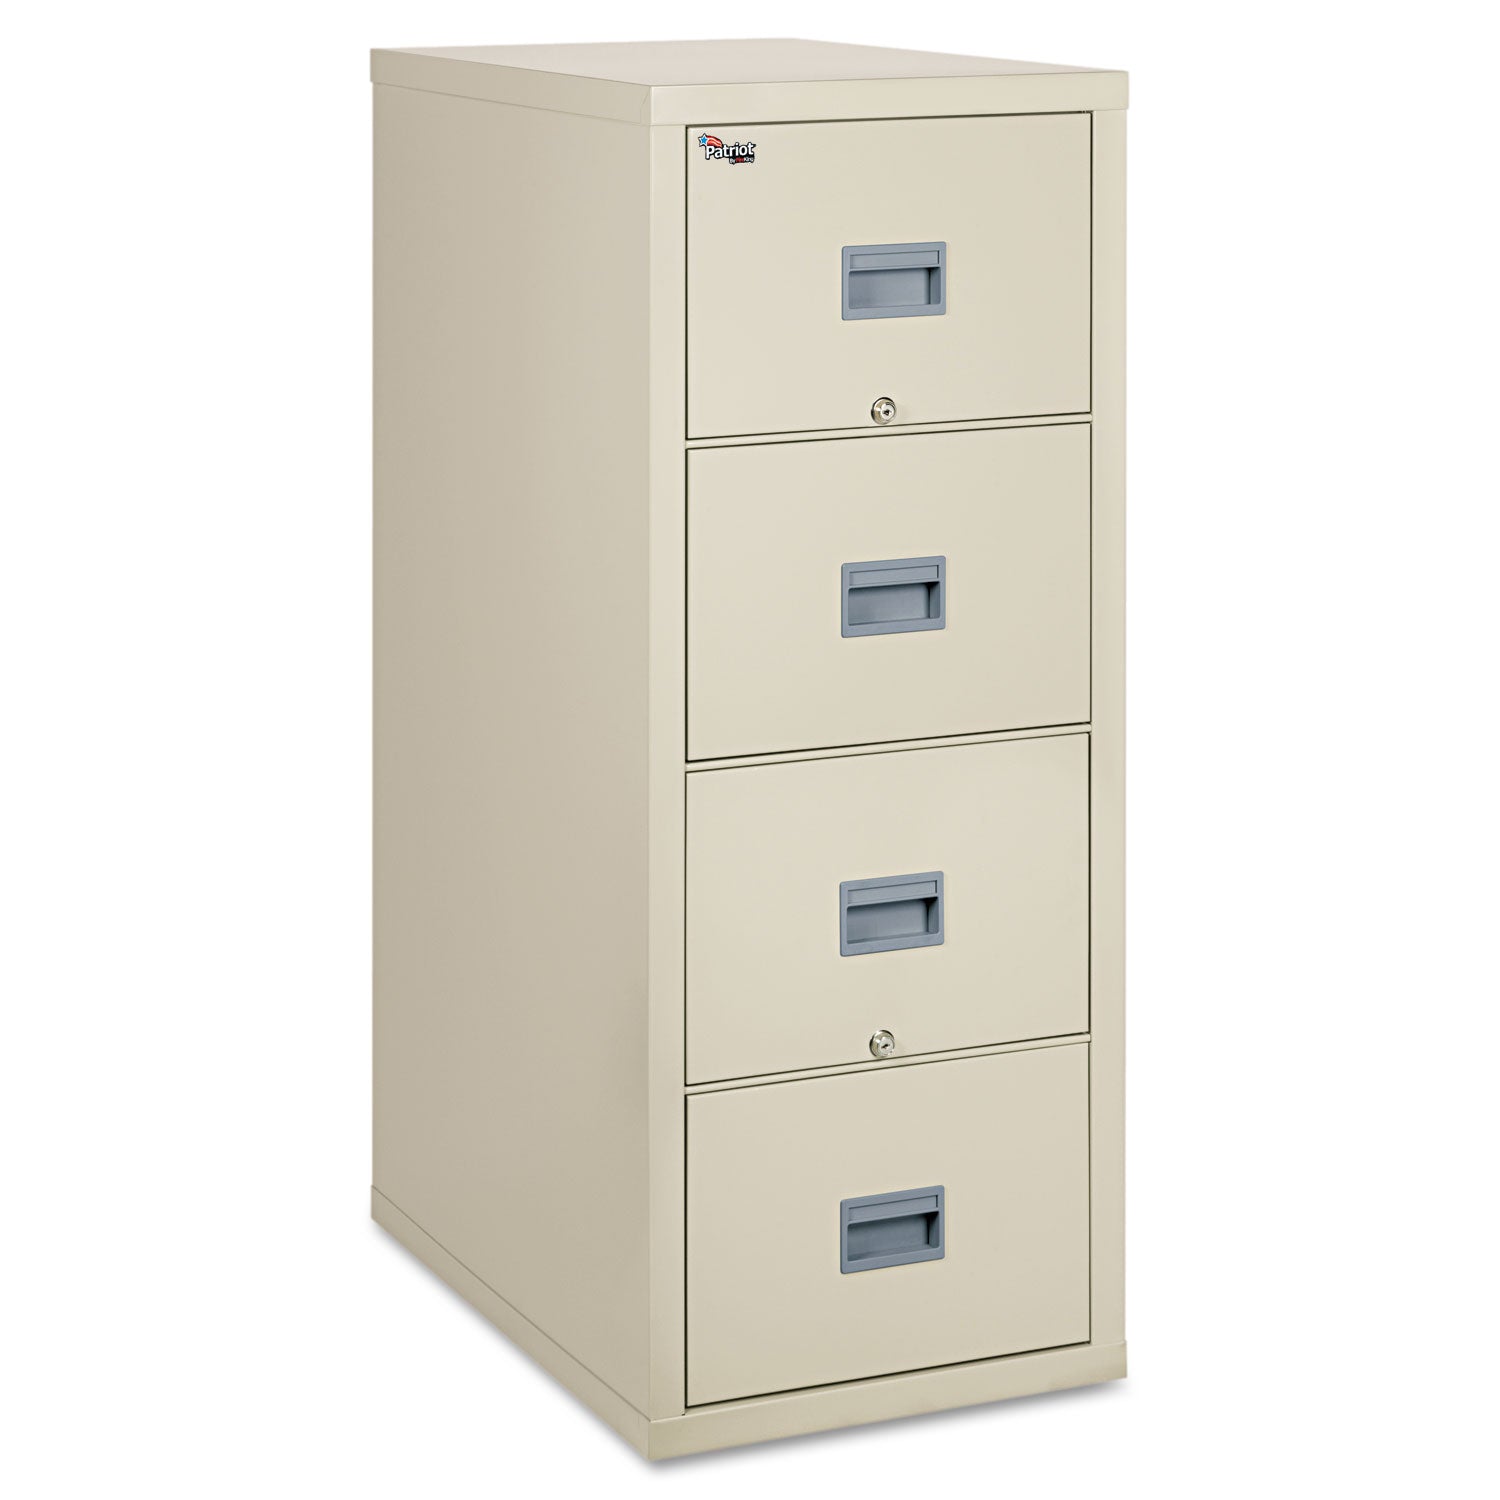 FireKing Patriot Series 4-Drawer Vertical Fire Files - 20.8" x 31.6" x 52.8" - 4 x Drawer(s) for File - Legal - Vertical - Fire Proof, Impact Resistant, Locking Drawer, Scratch Resistant, Recessed Handle, Ball Bearing Slide - Parchment - Gypsum, Stee - 1